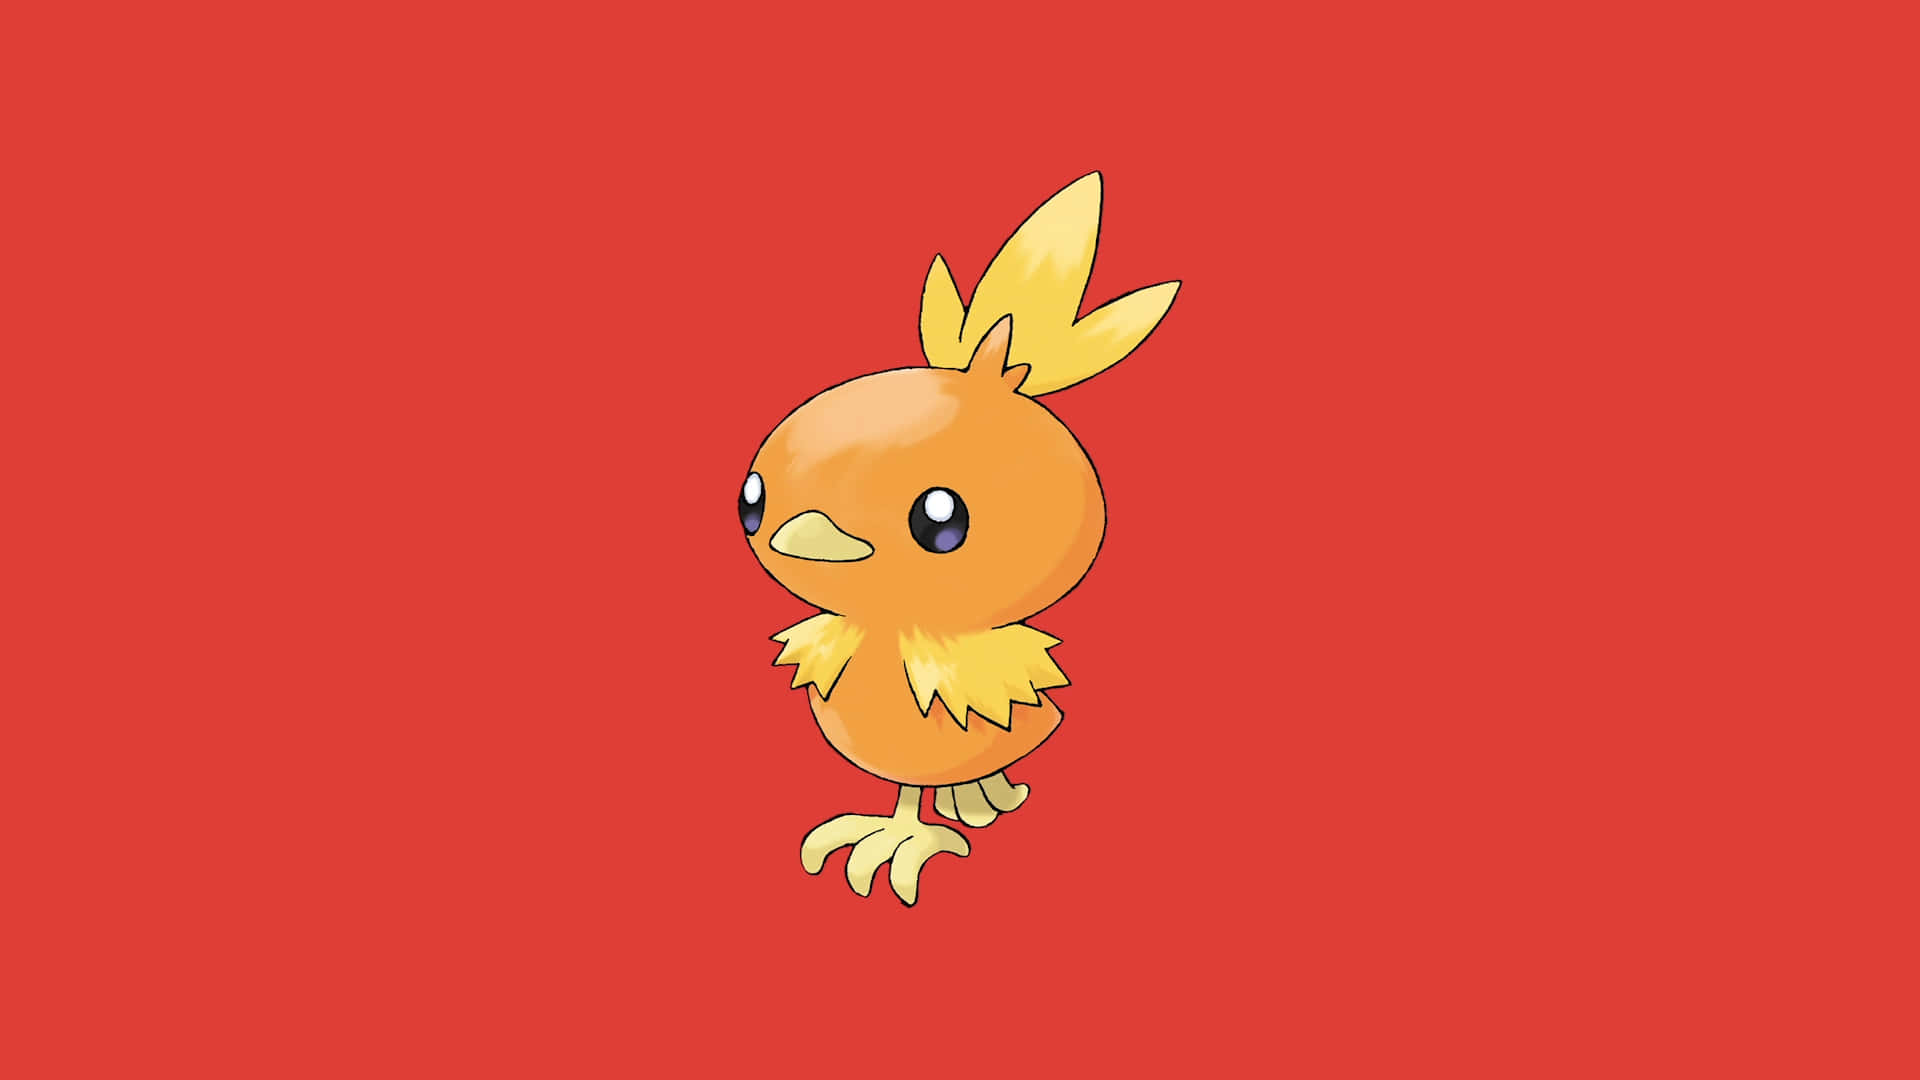 Torchic Illustration On Red Background Wallpaper